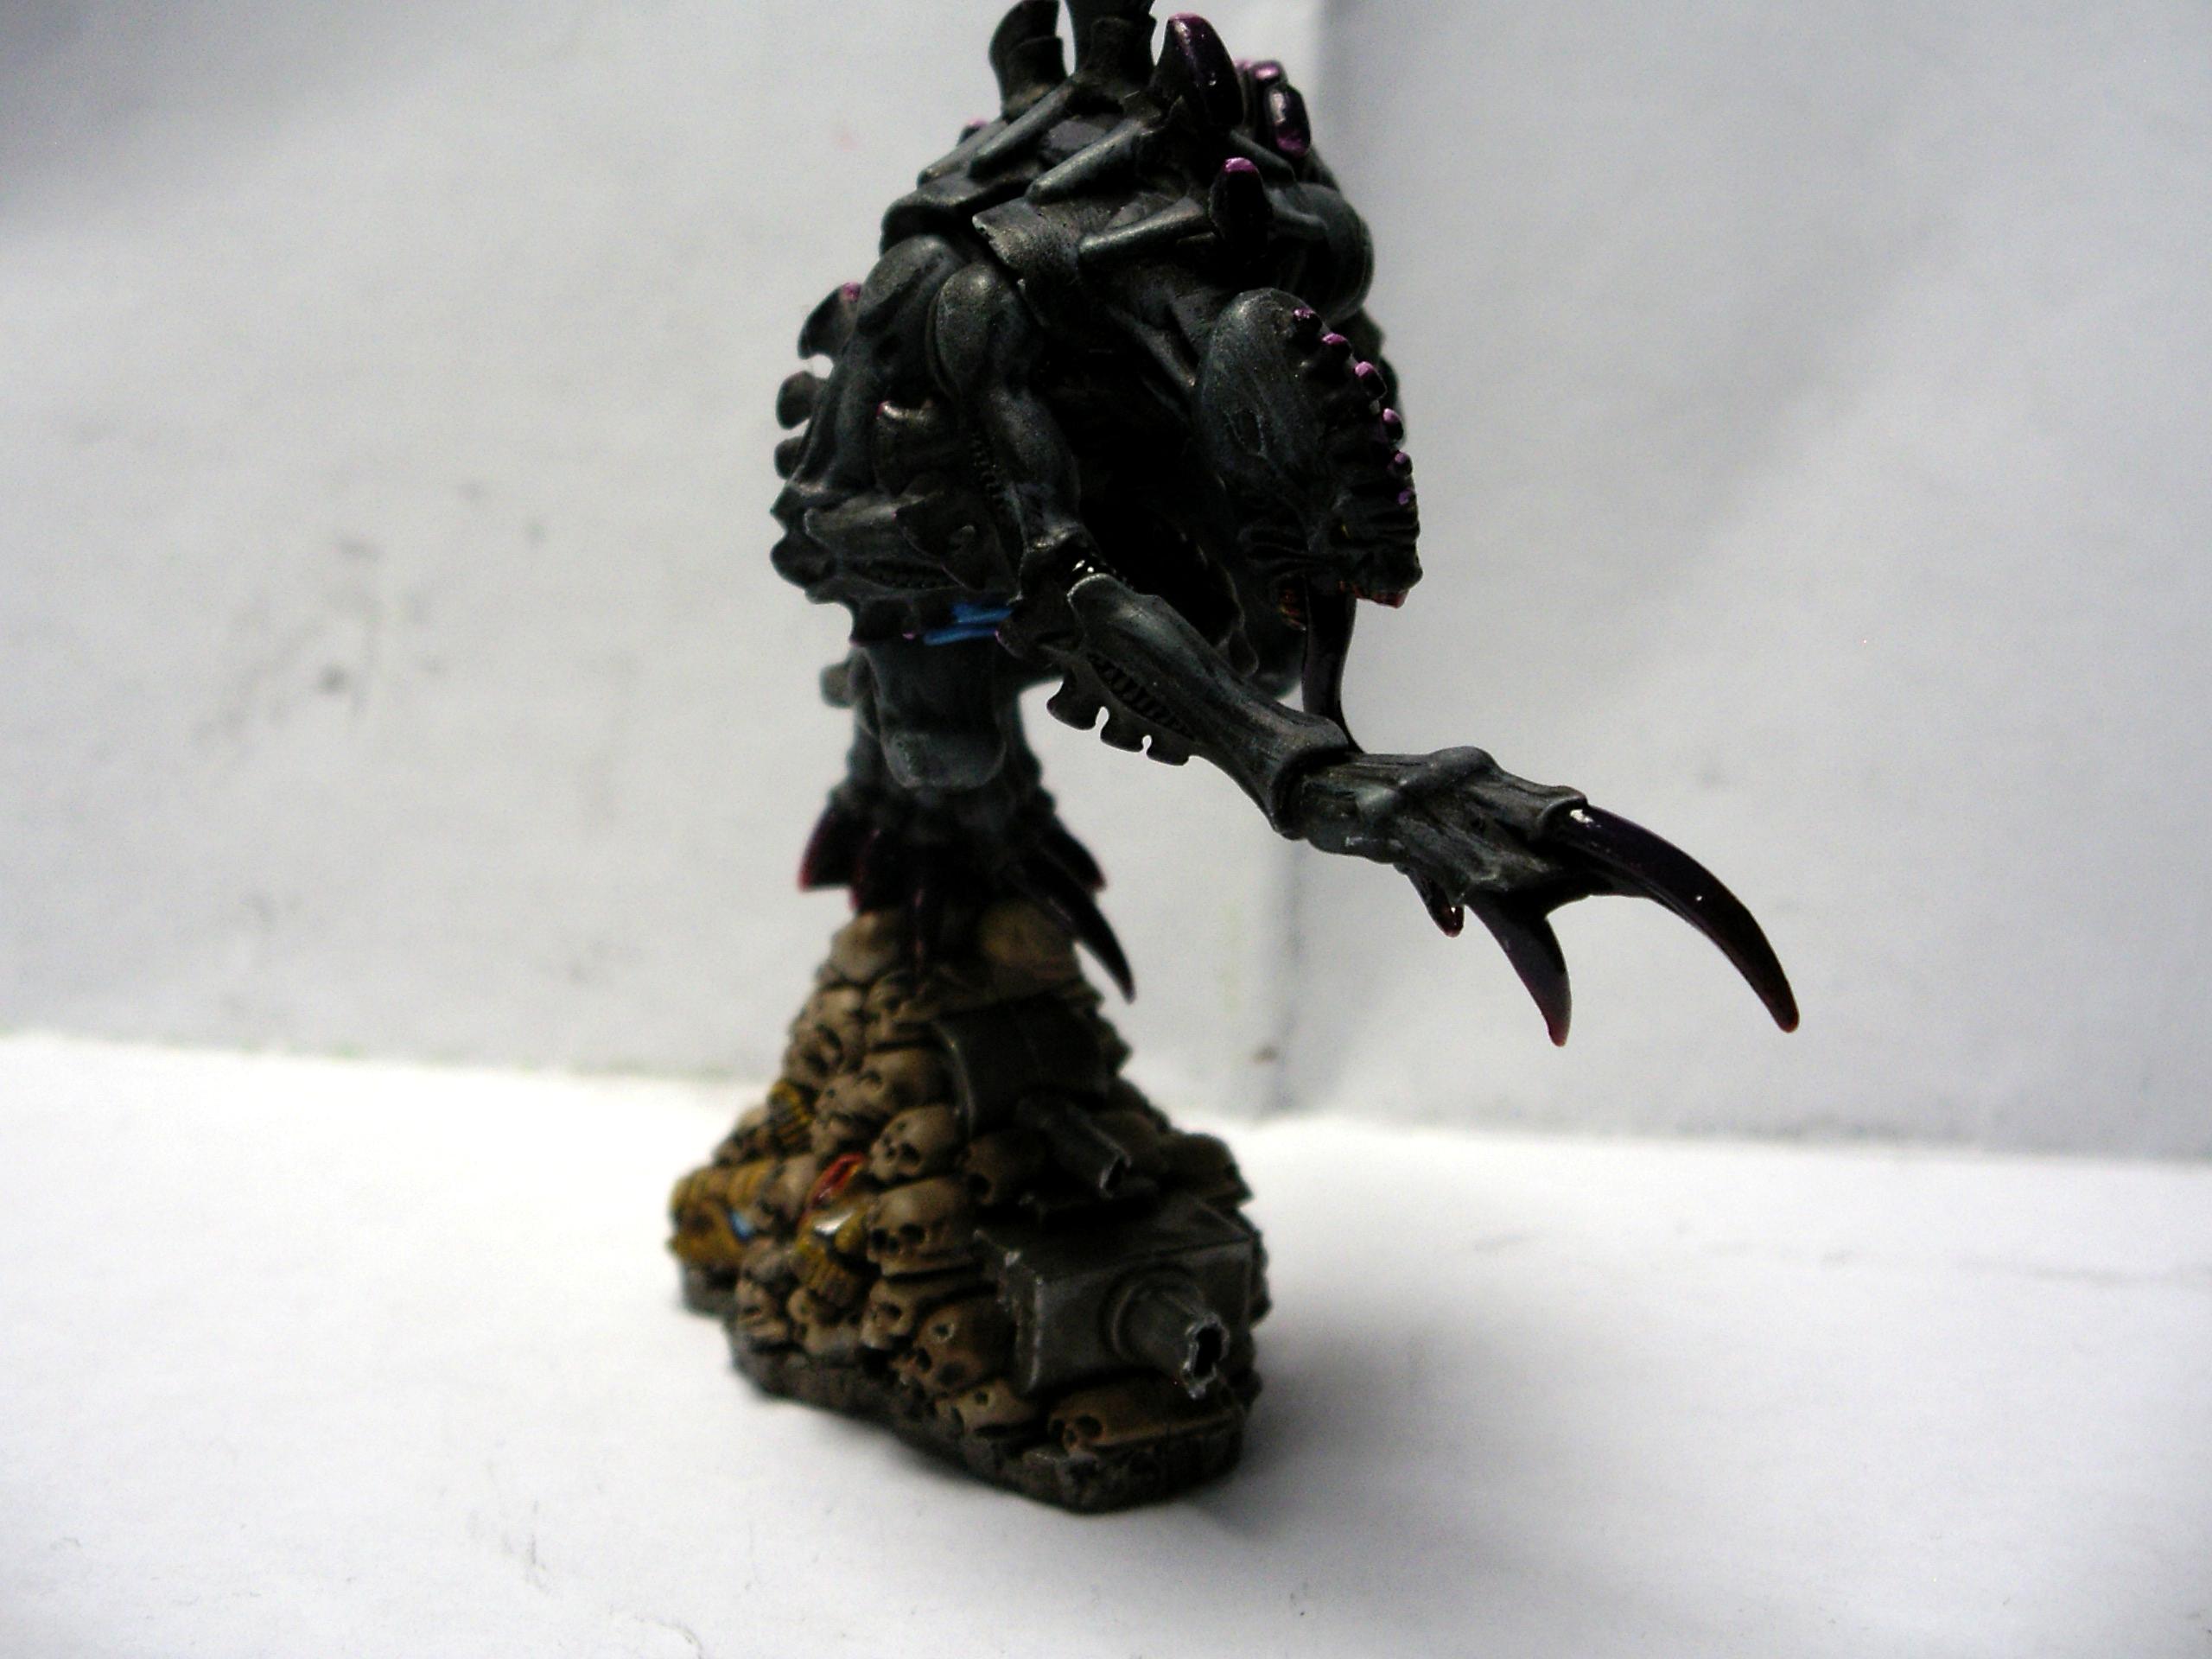 Aquaterry, Black, Broodlord, Genestealer, Nid, Out Of Production, Pile Of Skulls, Space Hulk, Tyranids, Warhammer 40,000